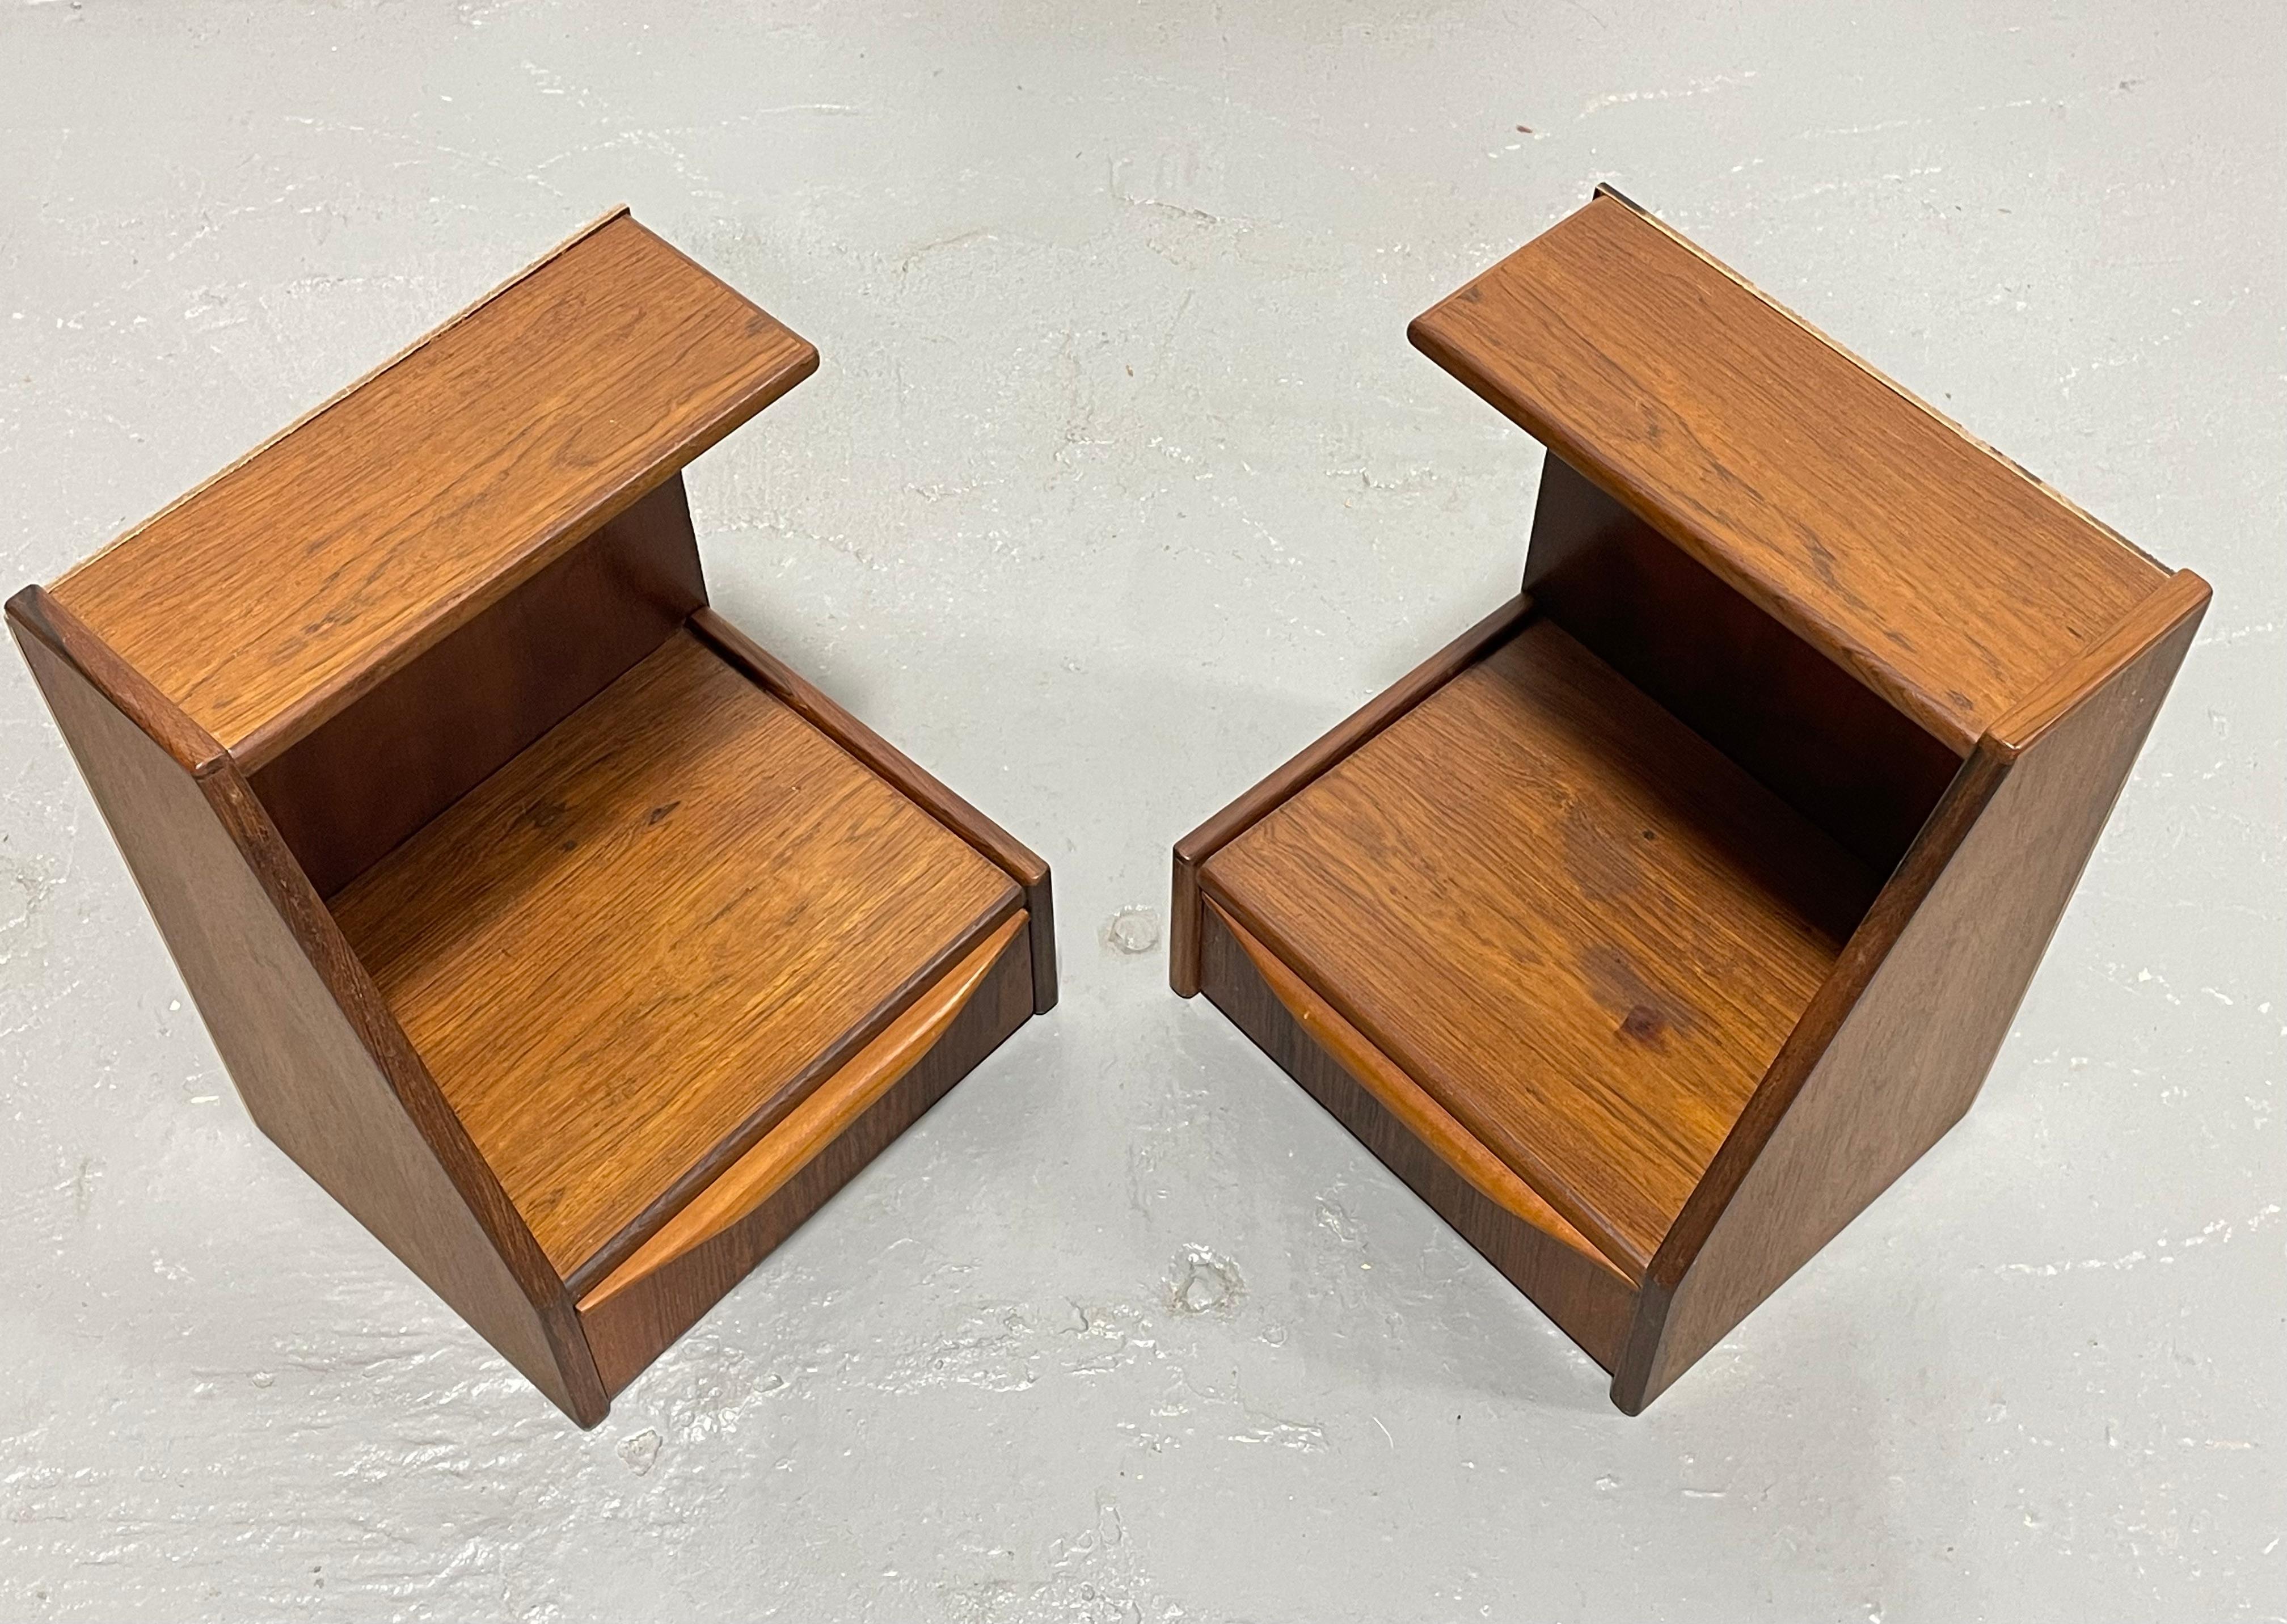 DANISH Mid Century Modern ROSEWOOD Hanging NIGHTSTANDS / Bedside Tables, c. 1950 For Sale 7